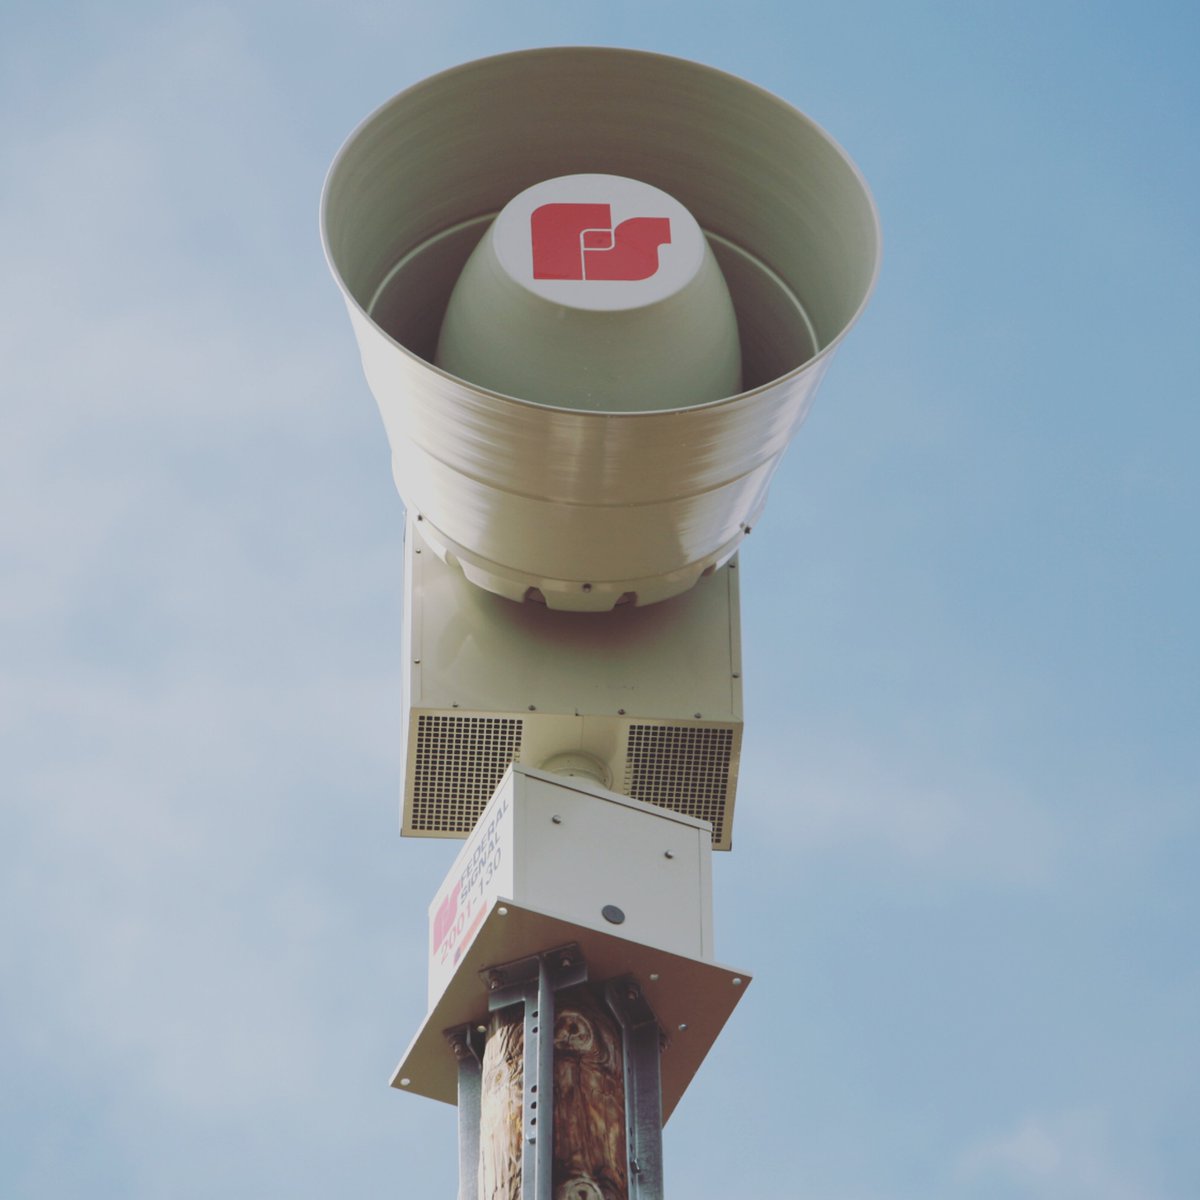 HAPPENING TODAY: It's the first Wednesday in April and that means we will be conducting our monthly storm-siren test. Storm sirens in #Harrisonville will be tested at 1 p.m. All tests are weather permitting. For more information about storm siren testing in Harrisonville, please…